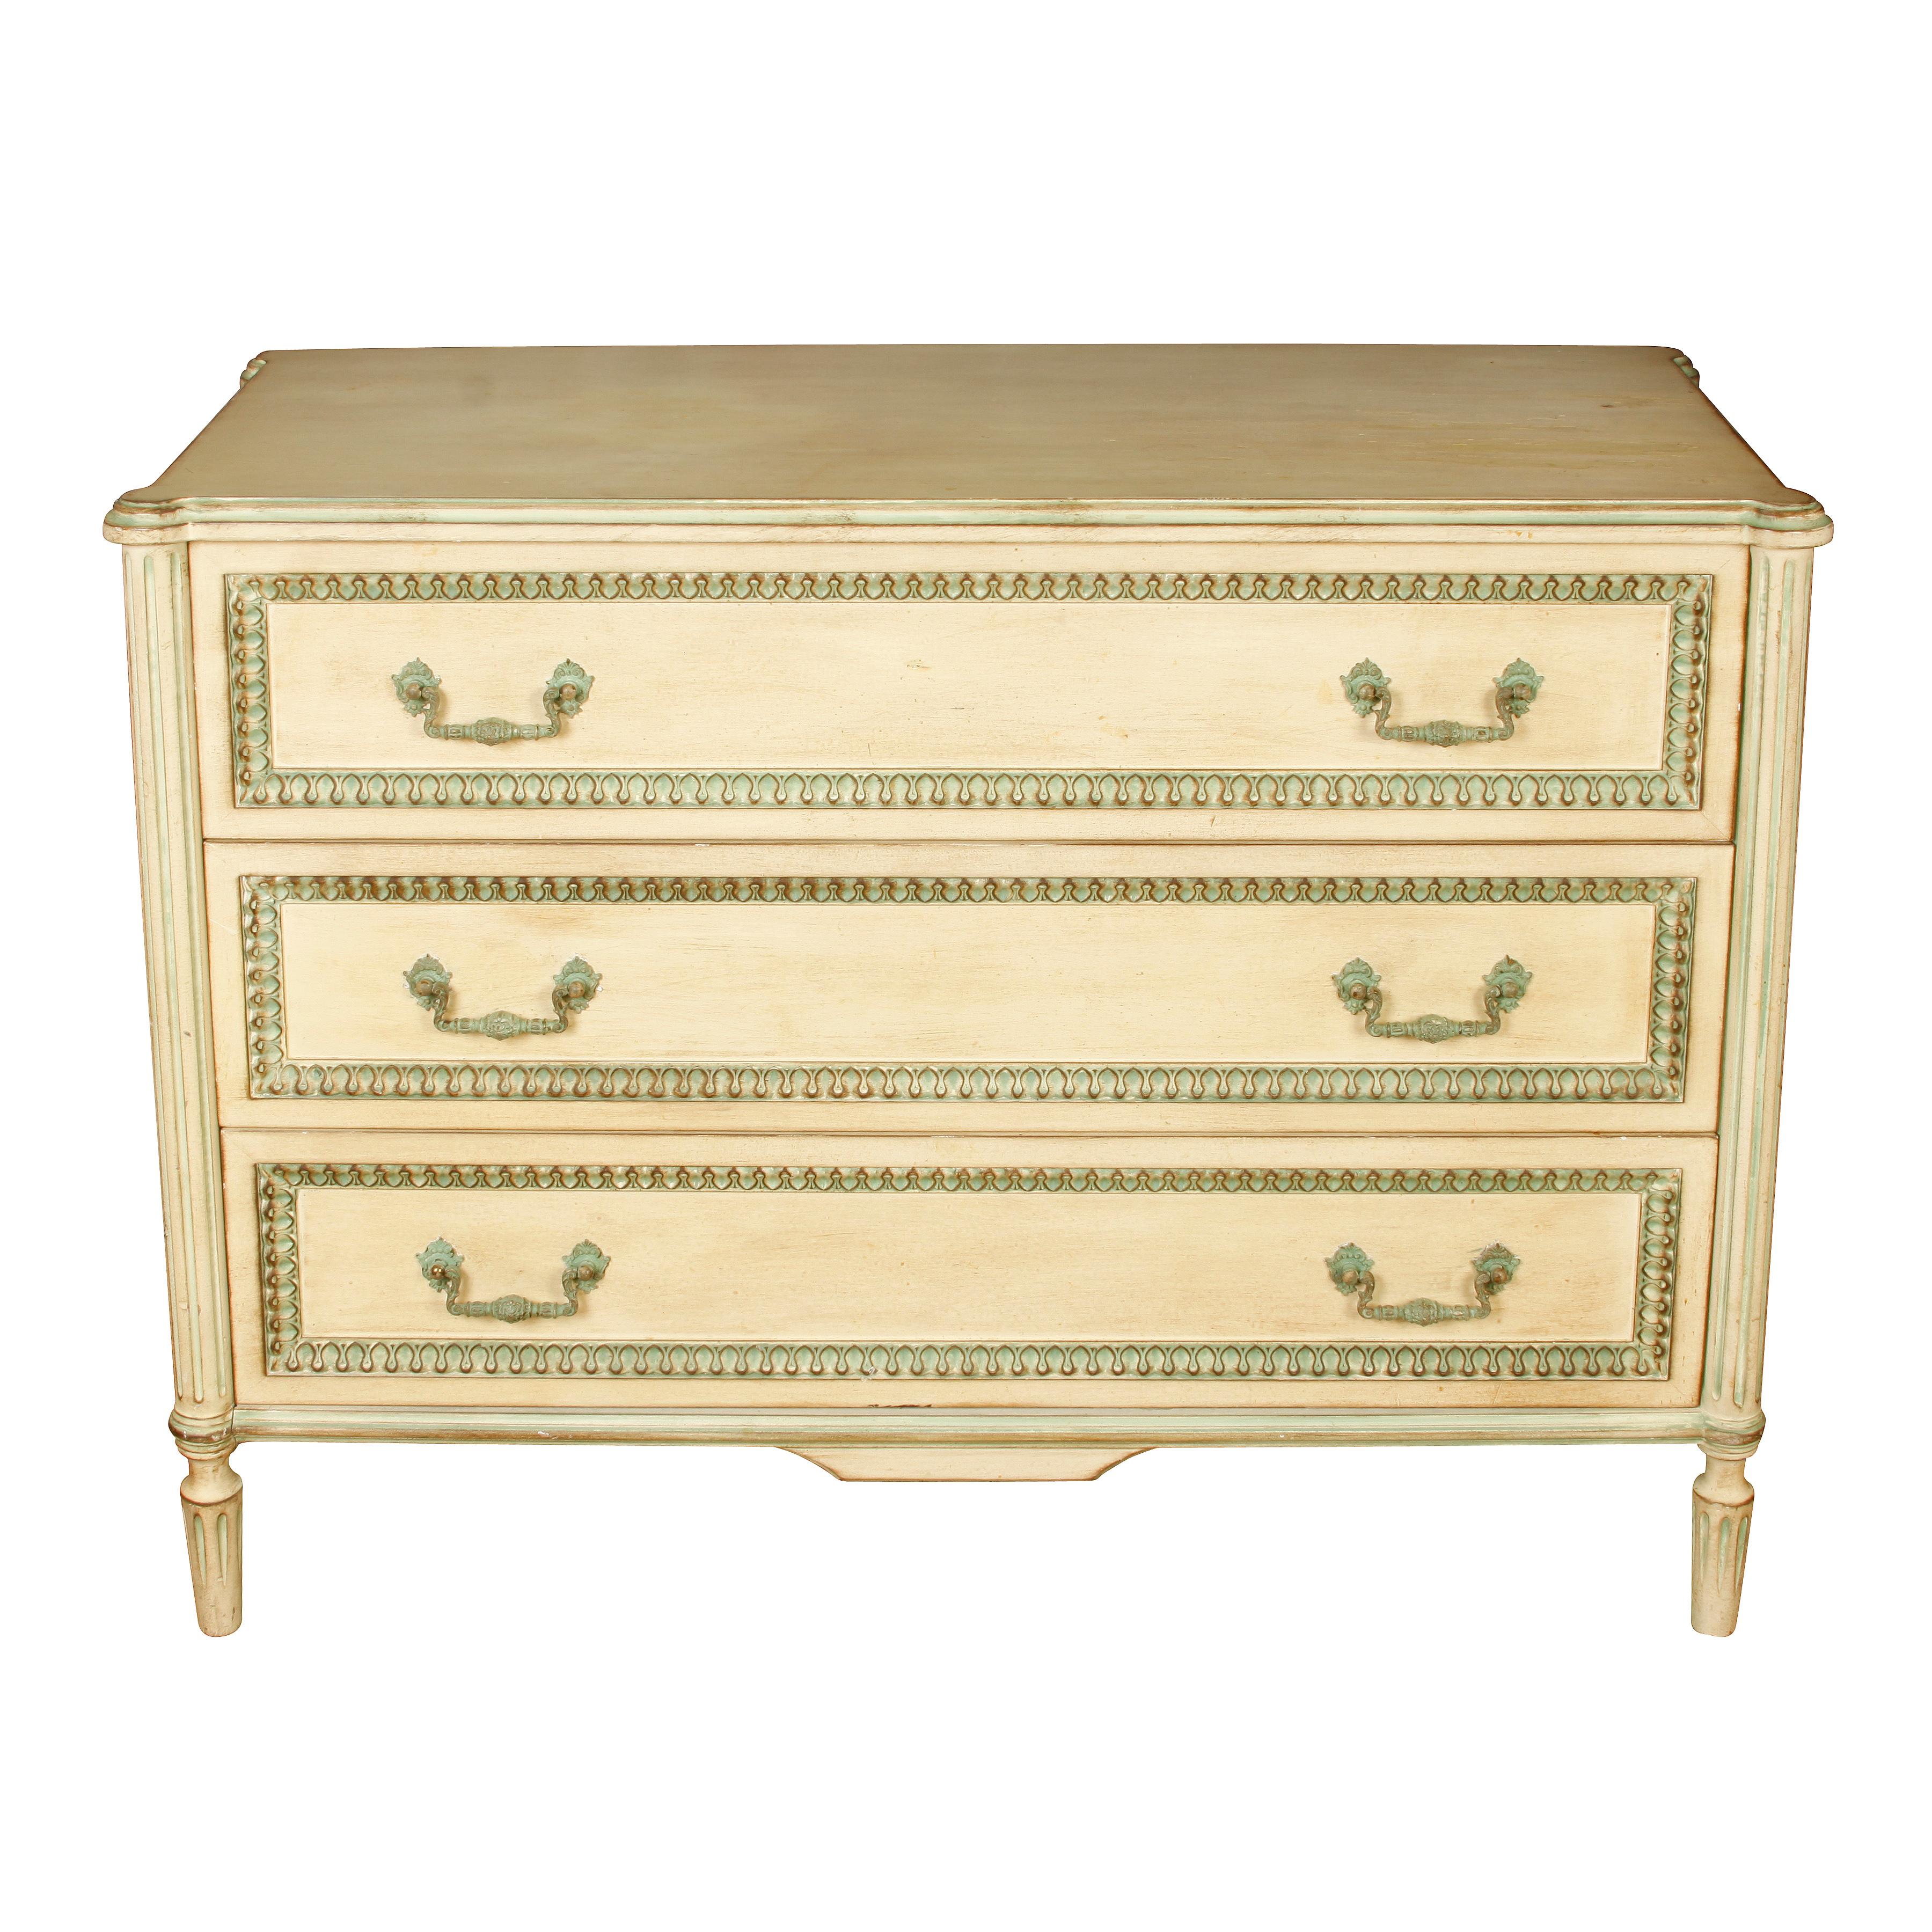 Louis XVI Style Painted Chest